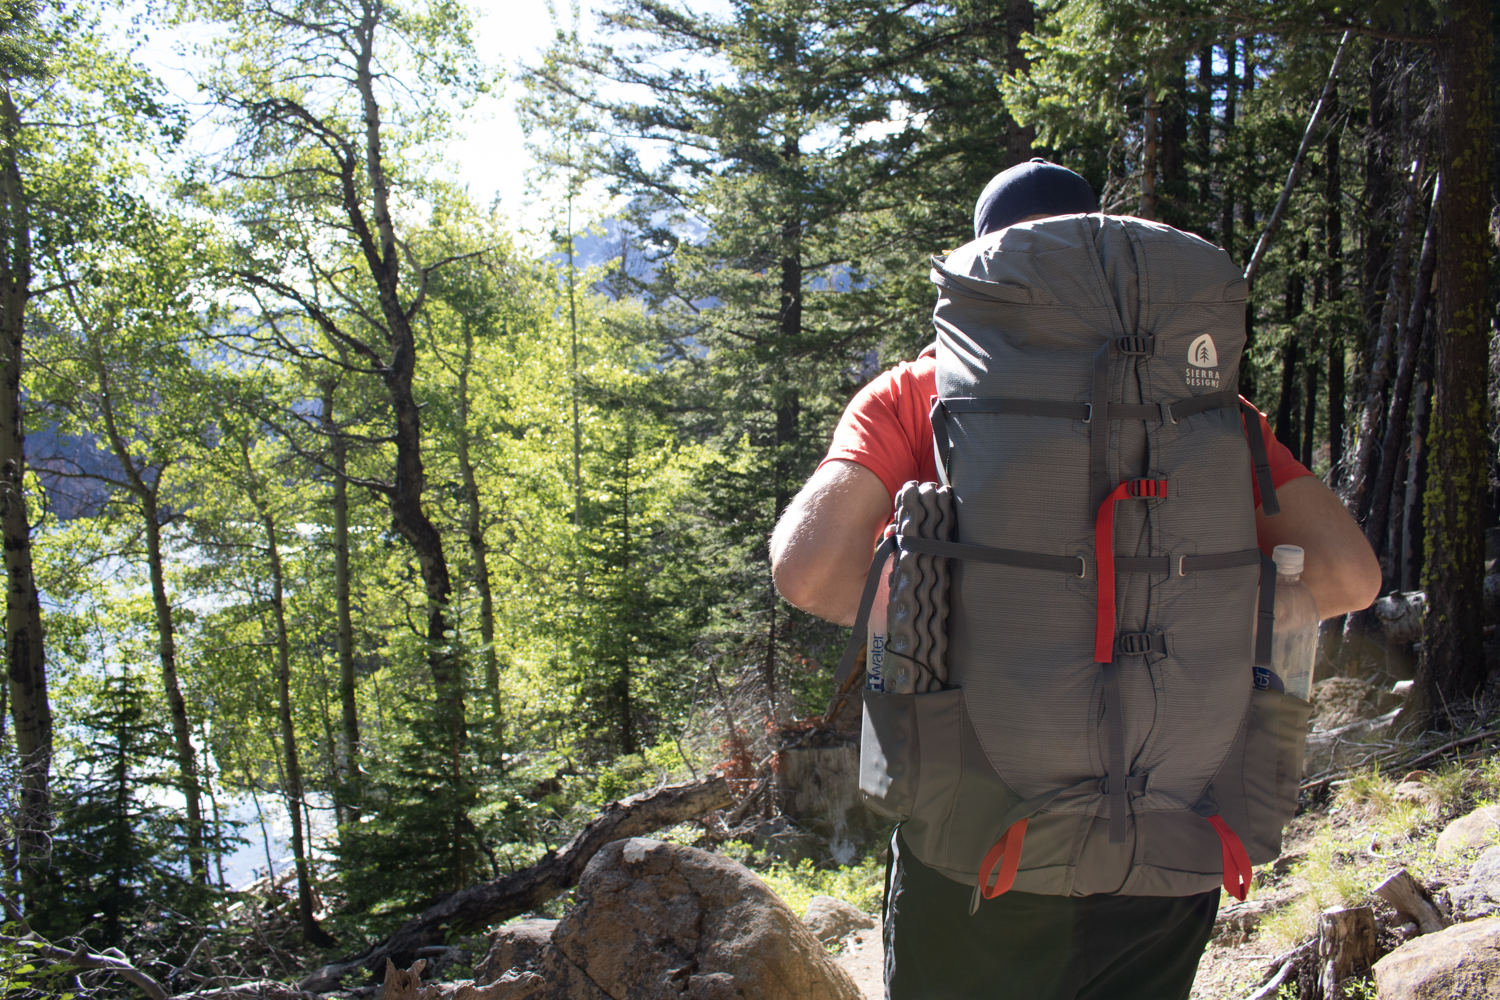 the Sierra Designs Flex Capacitor backpack is a quality budget option.